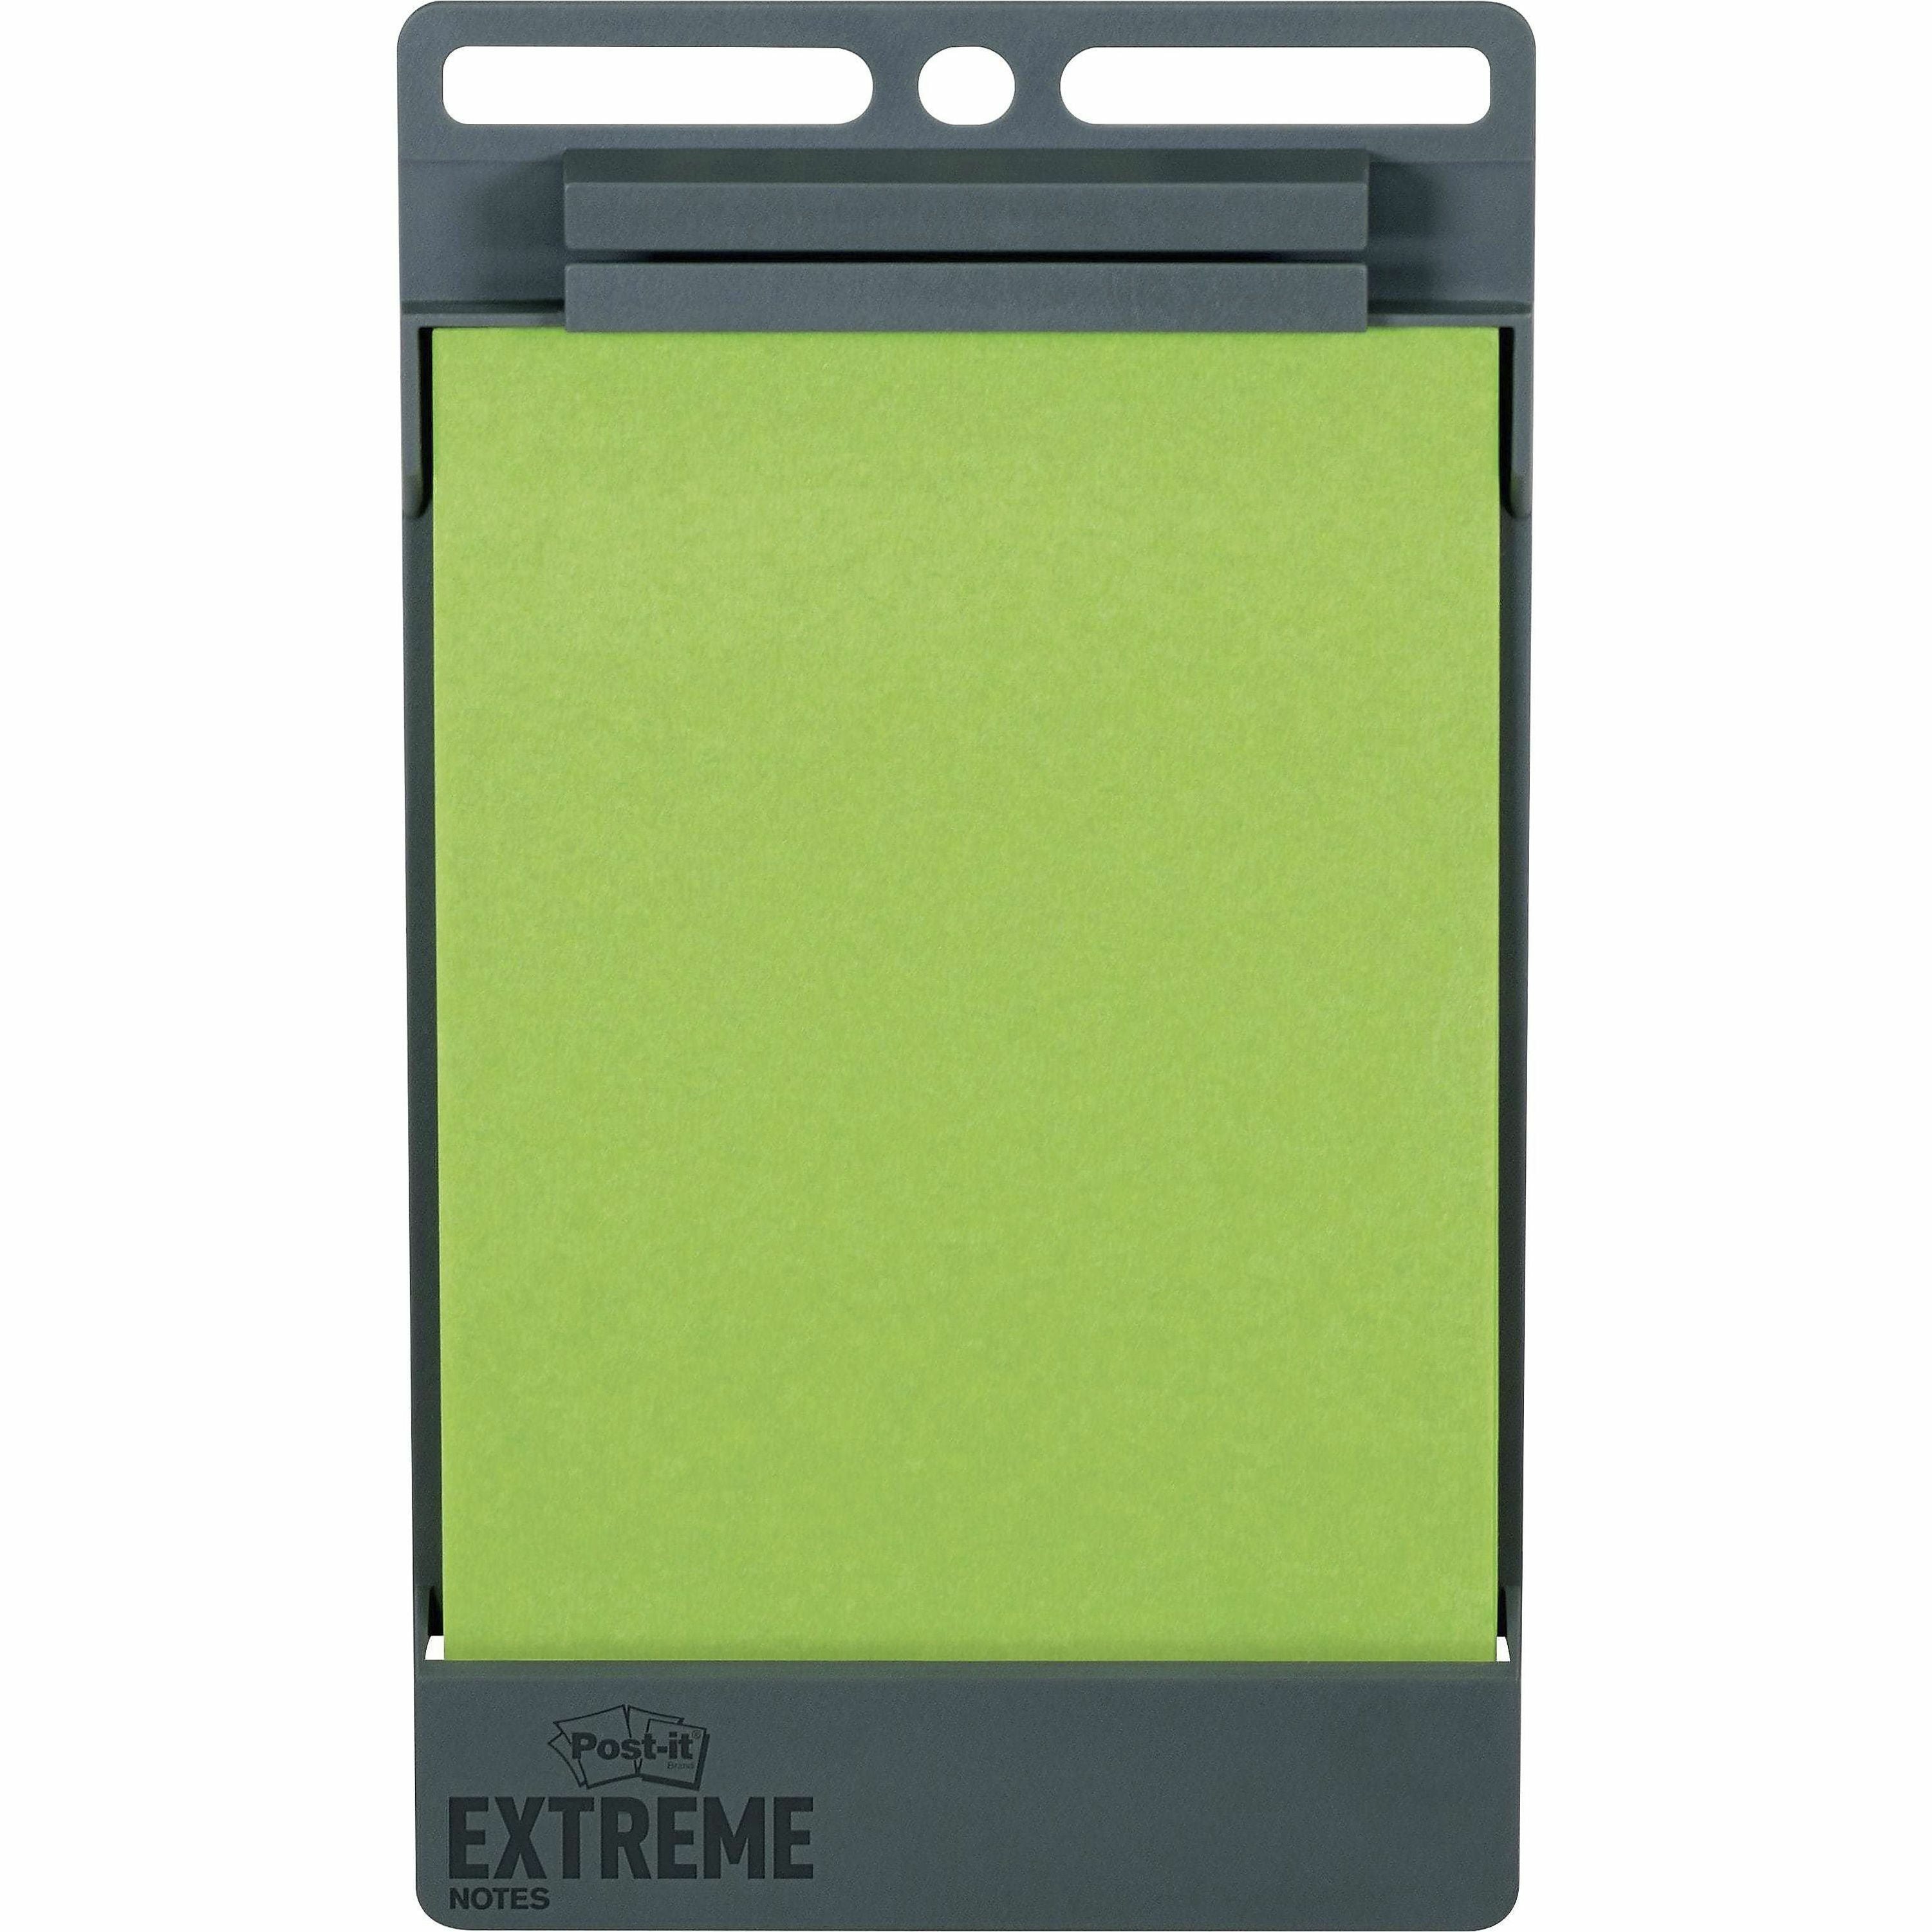 post-it-extreme-xl-notes-25-sheet-note-capacity-green_mmmxt456holder - 2